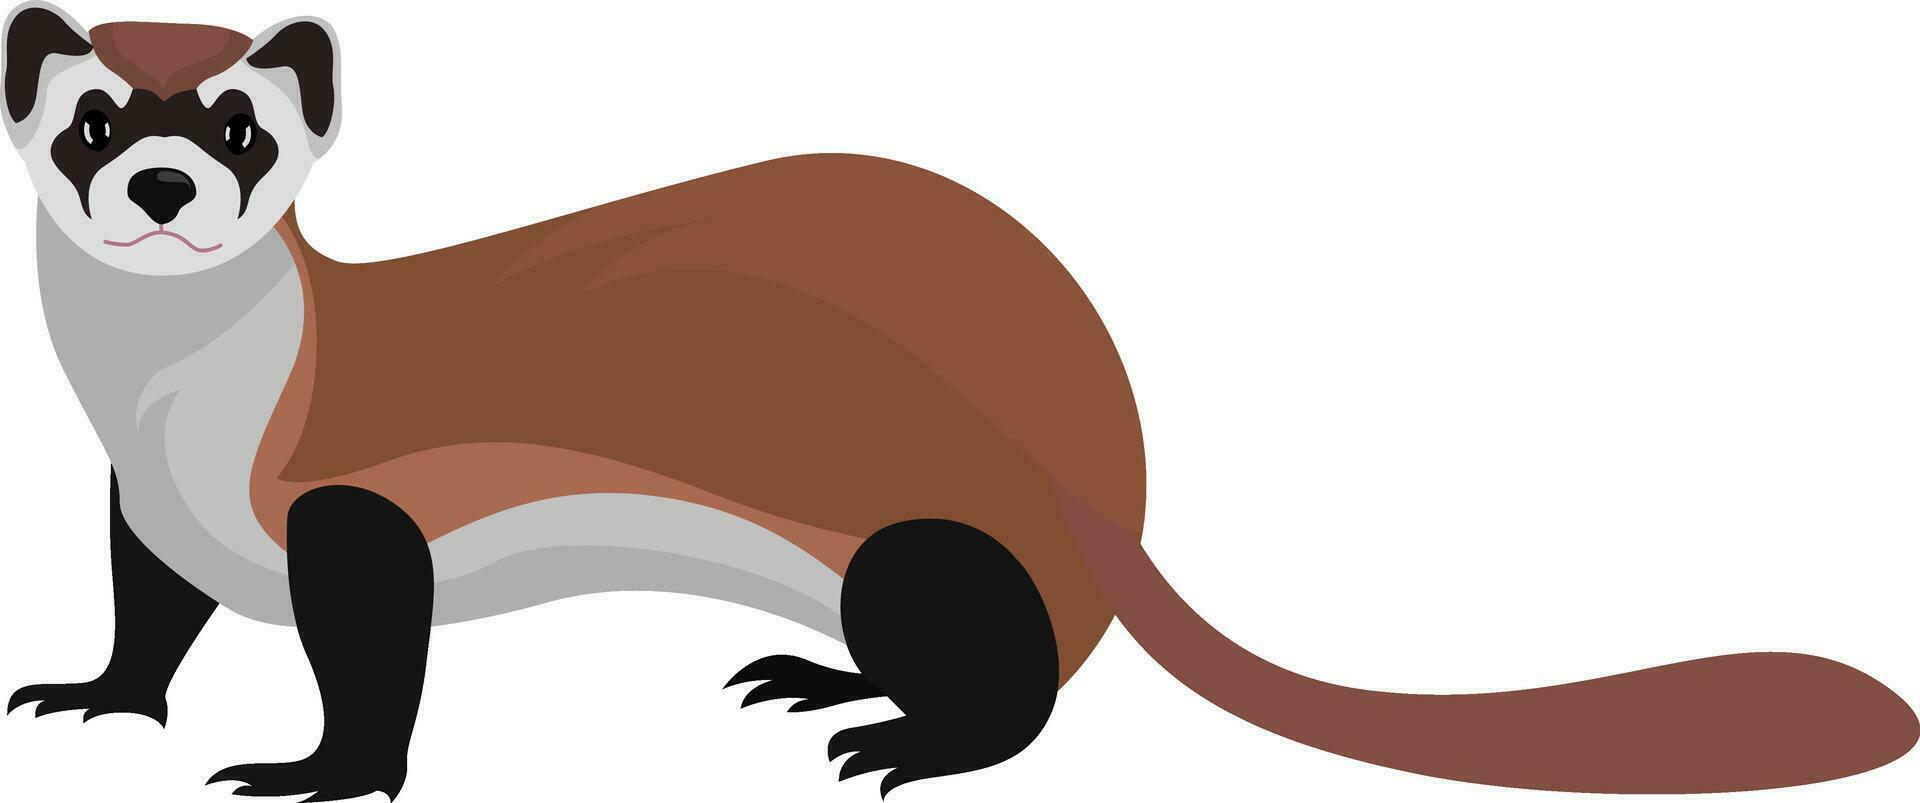 Moody weasel, illustration, vector on white background